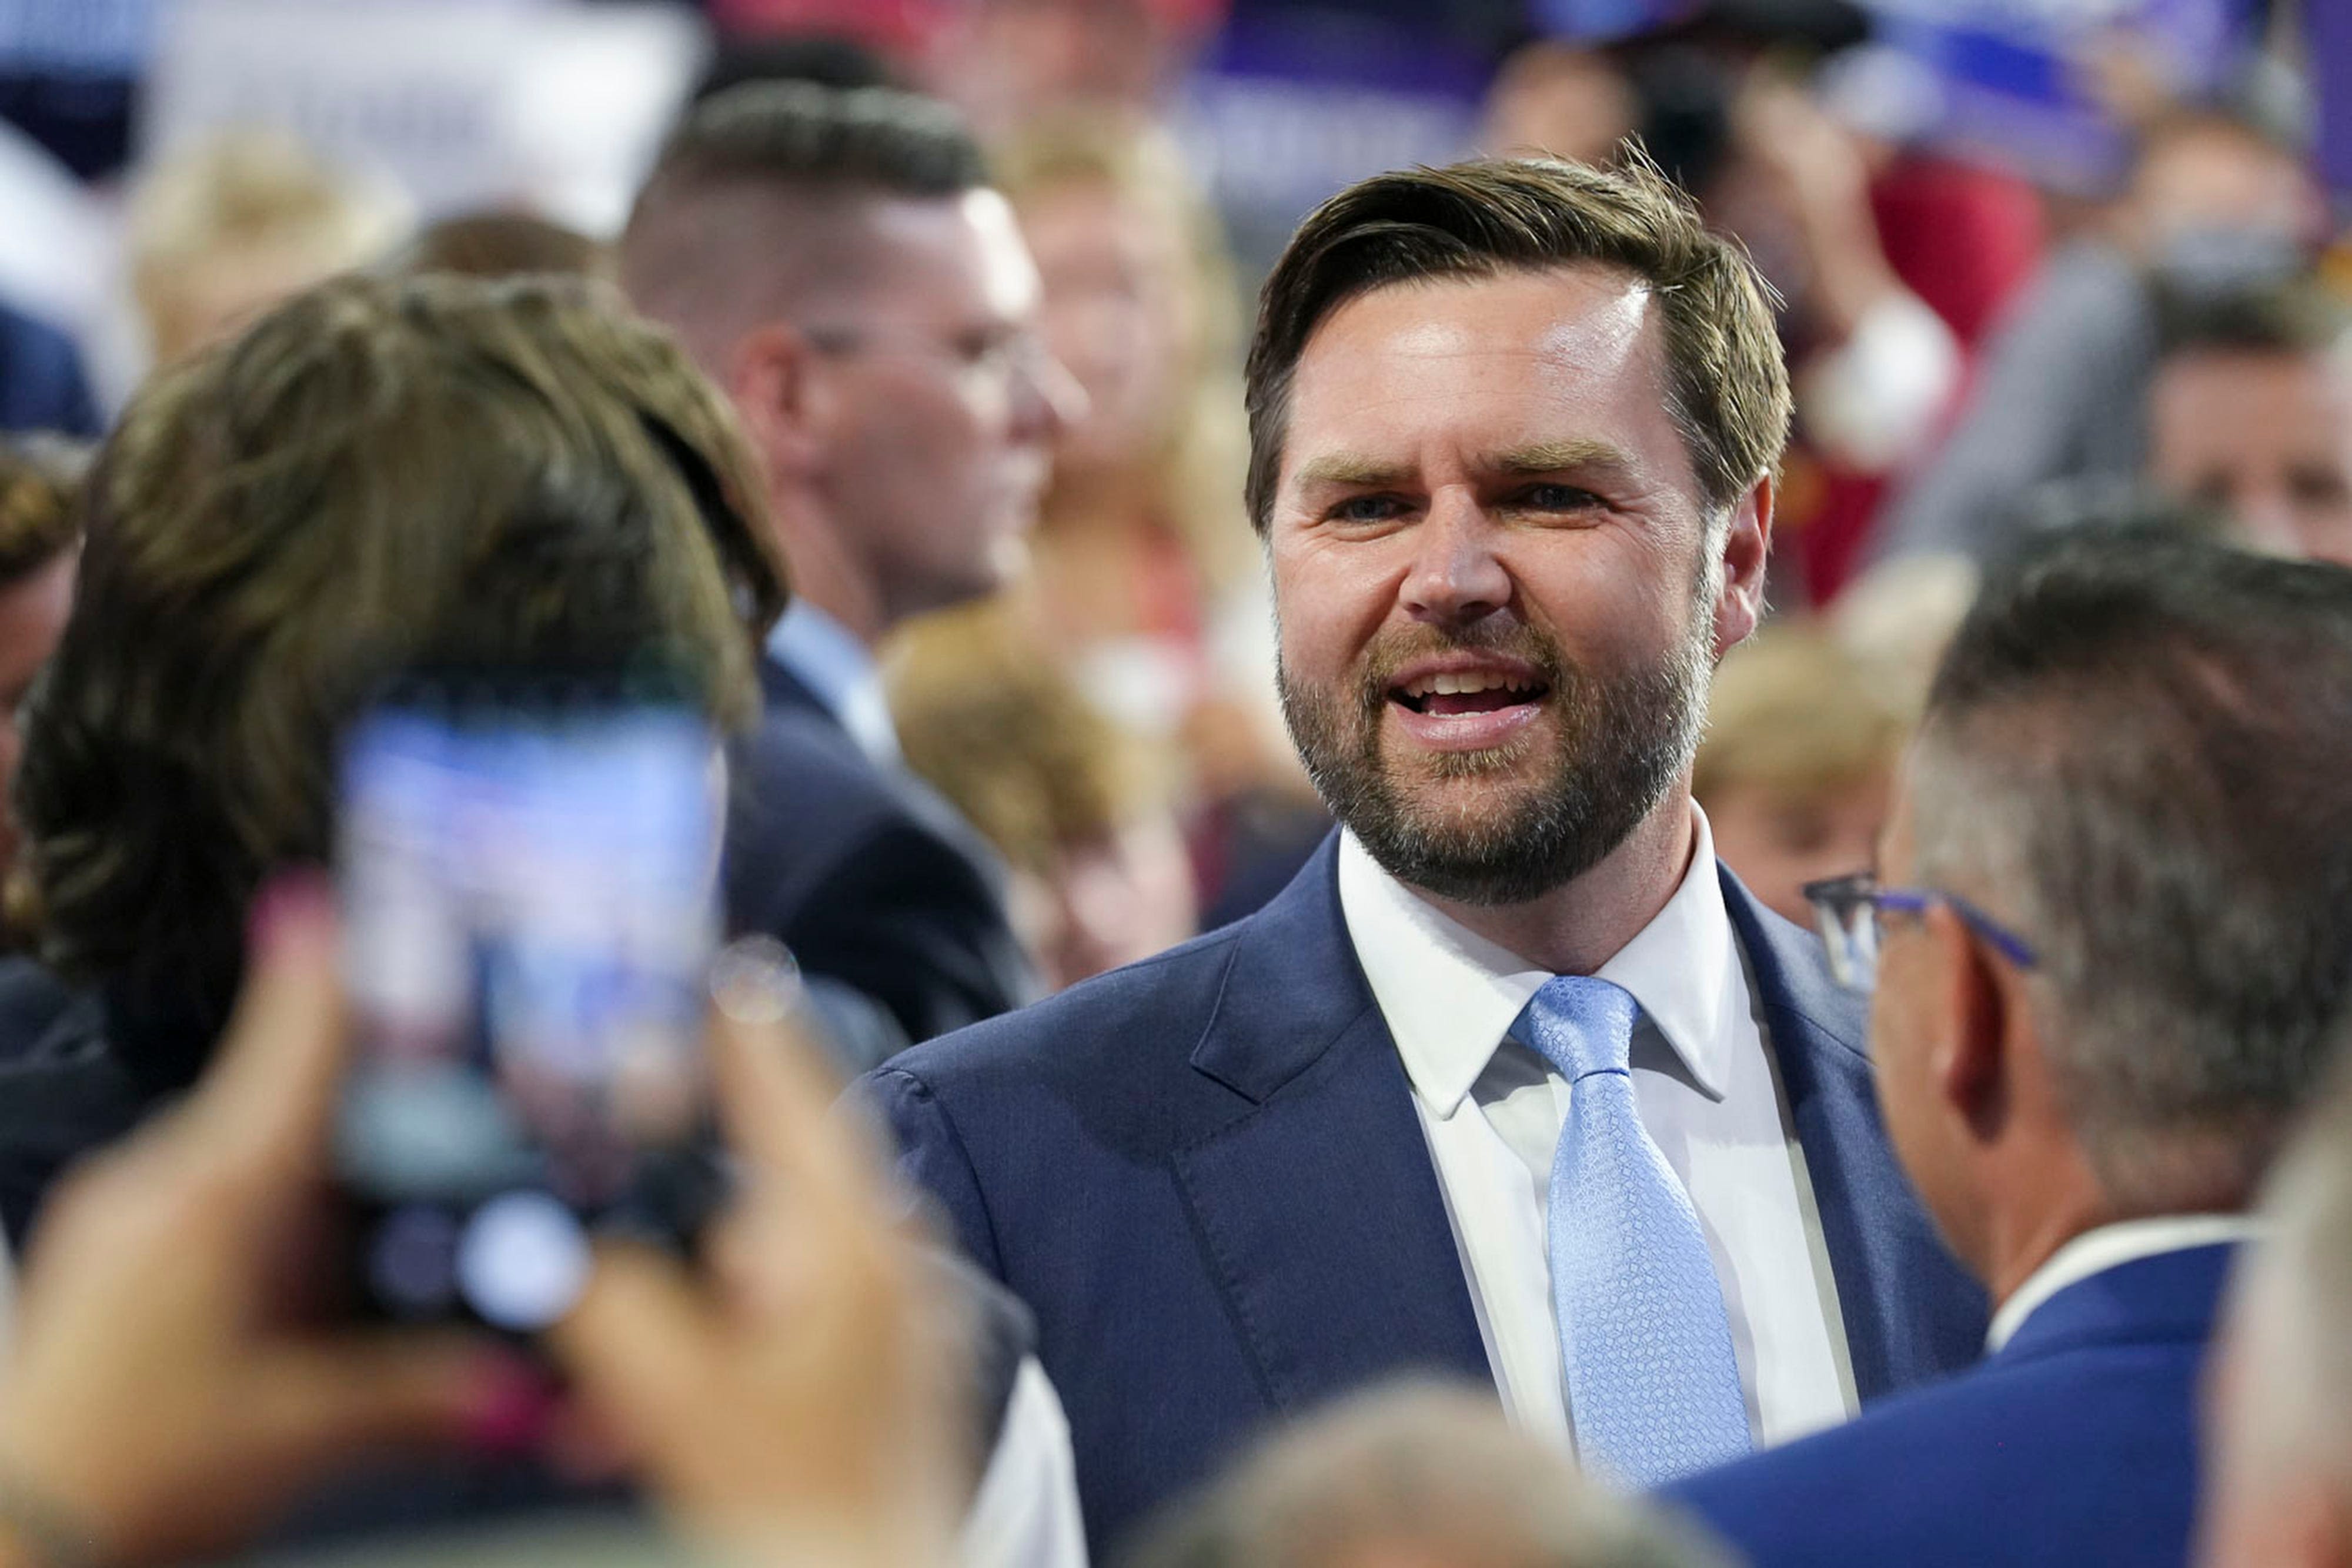 Wednesday night RNC speakers include a Milwaukee WWII veteran, vice presidential candidate JD Vance, former Speaker Newt Gingrich